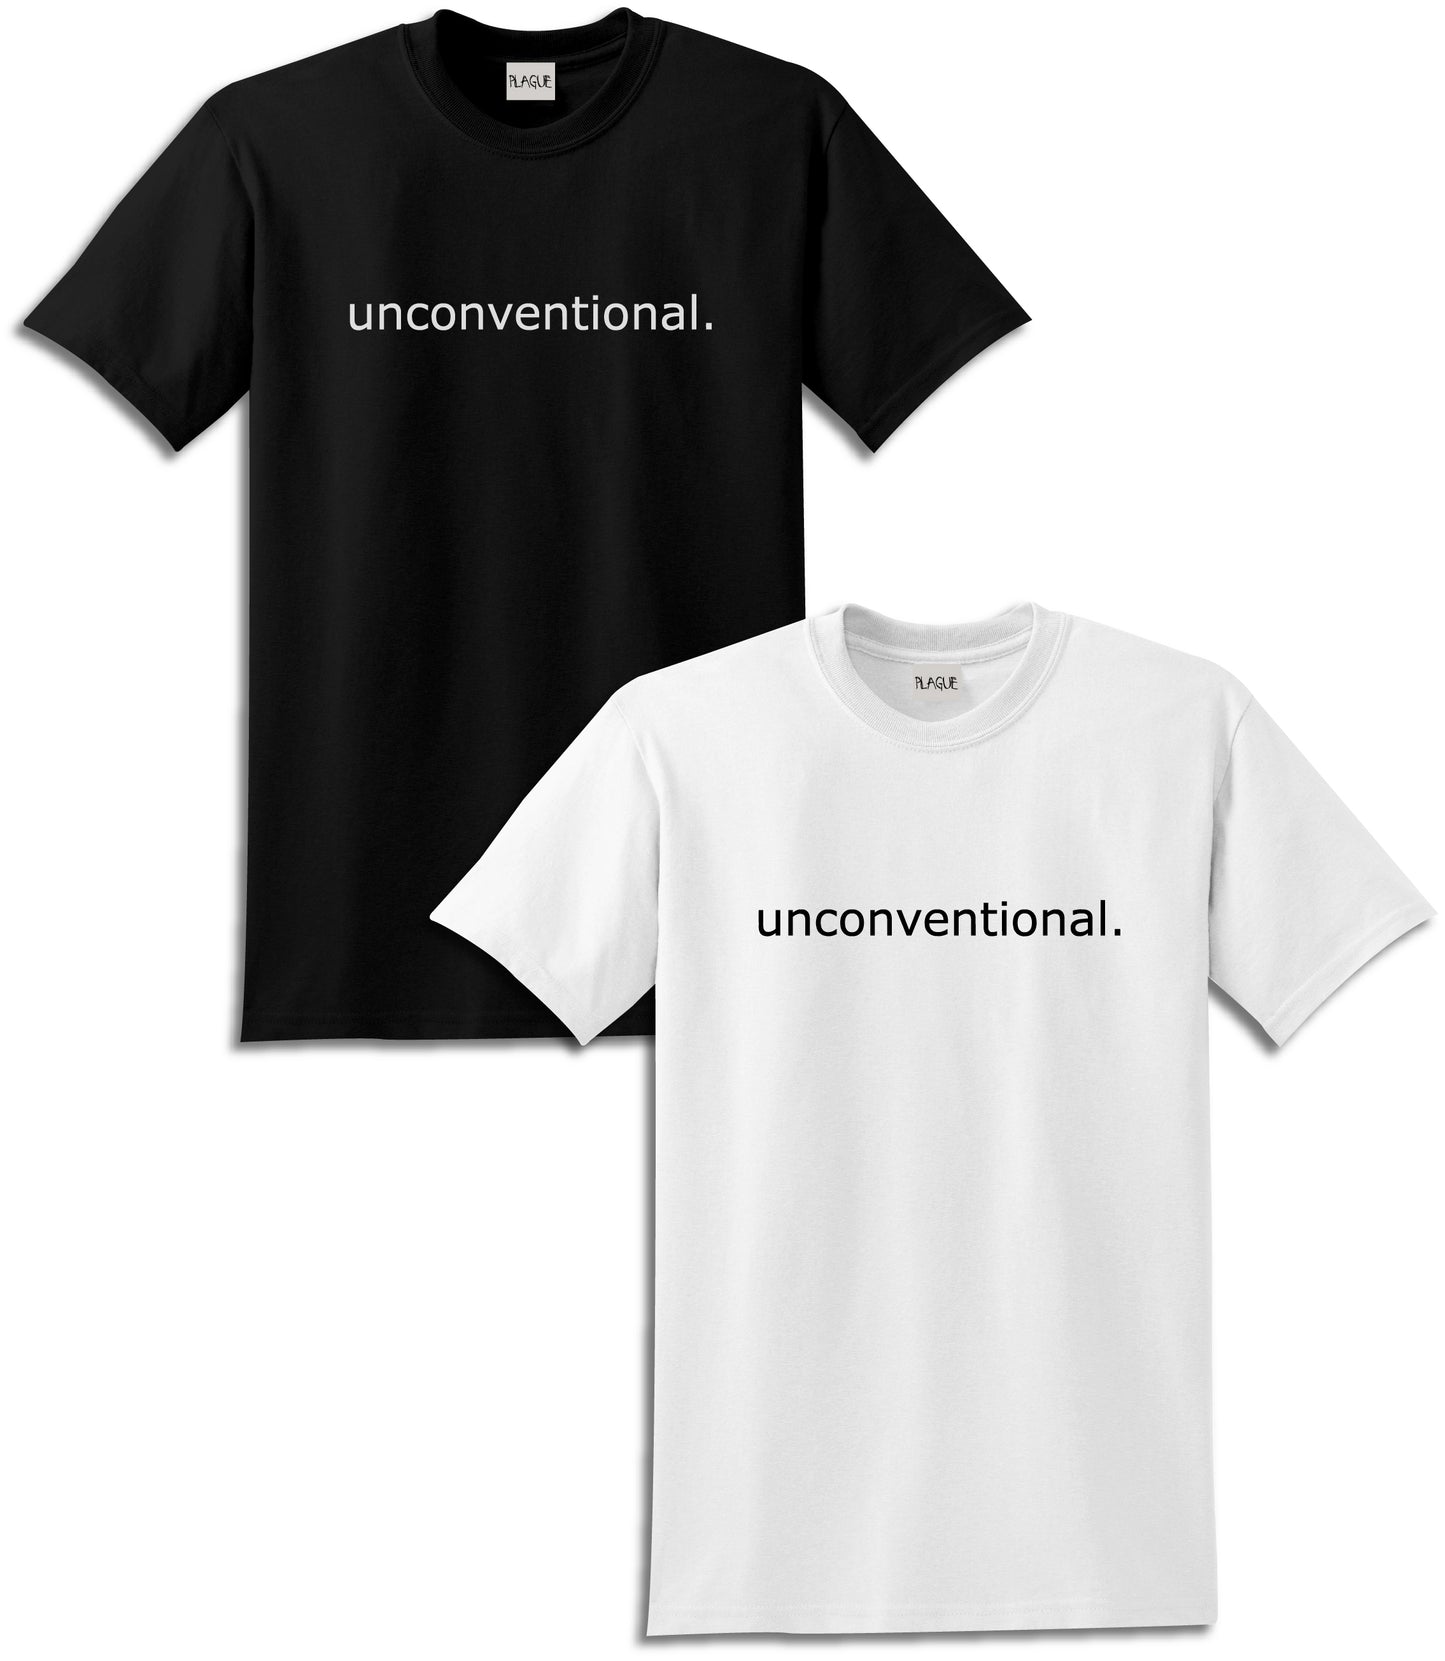 Unconventional Tee